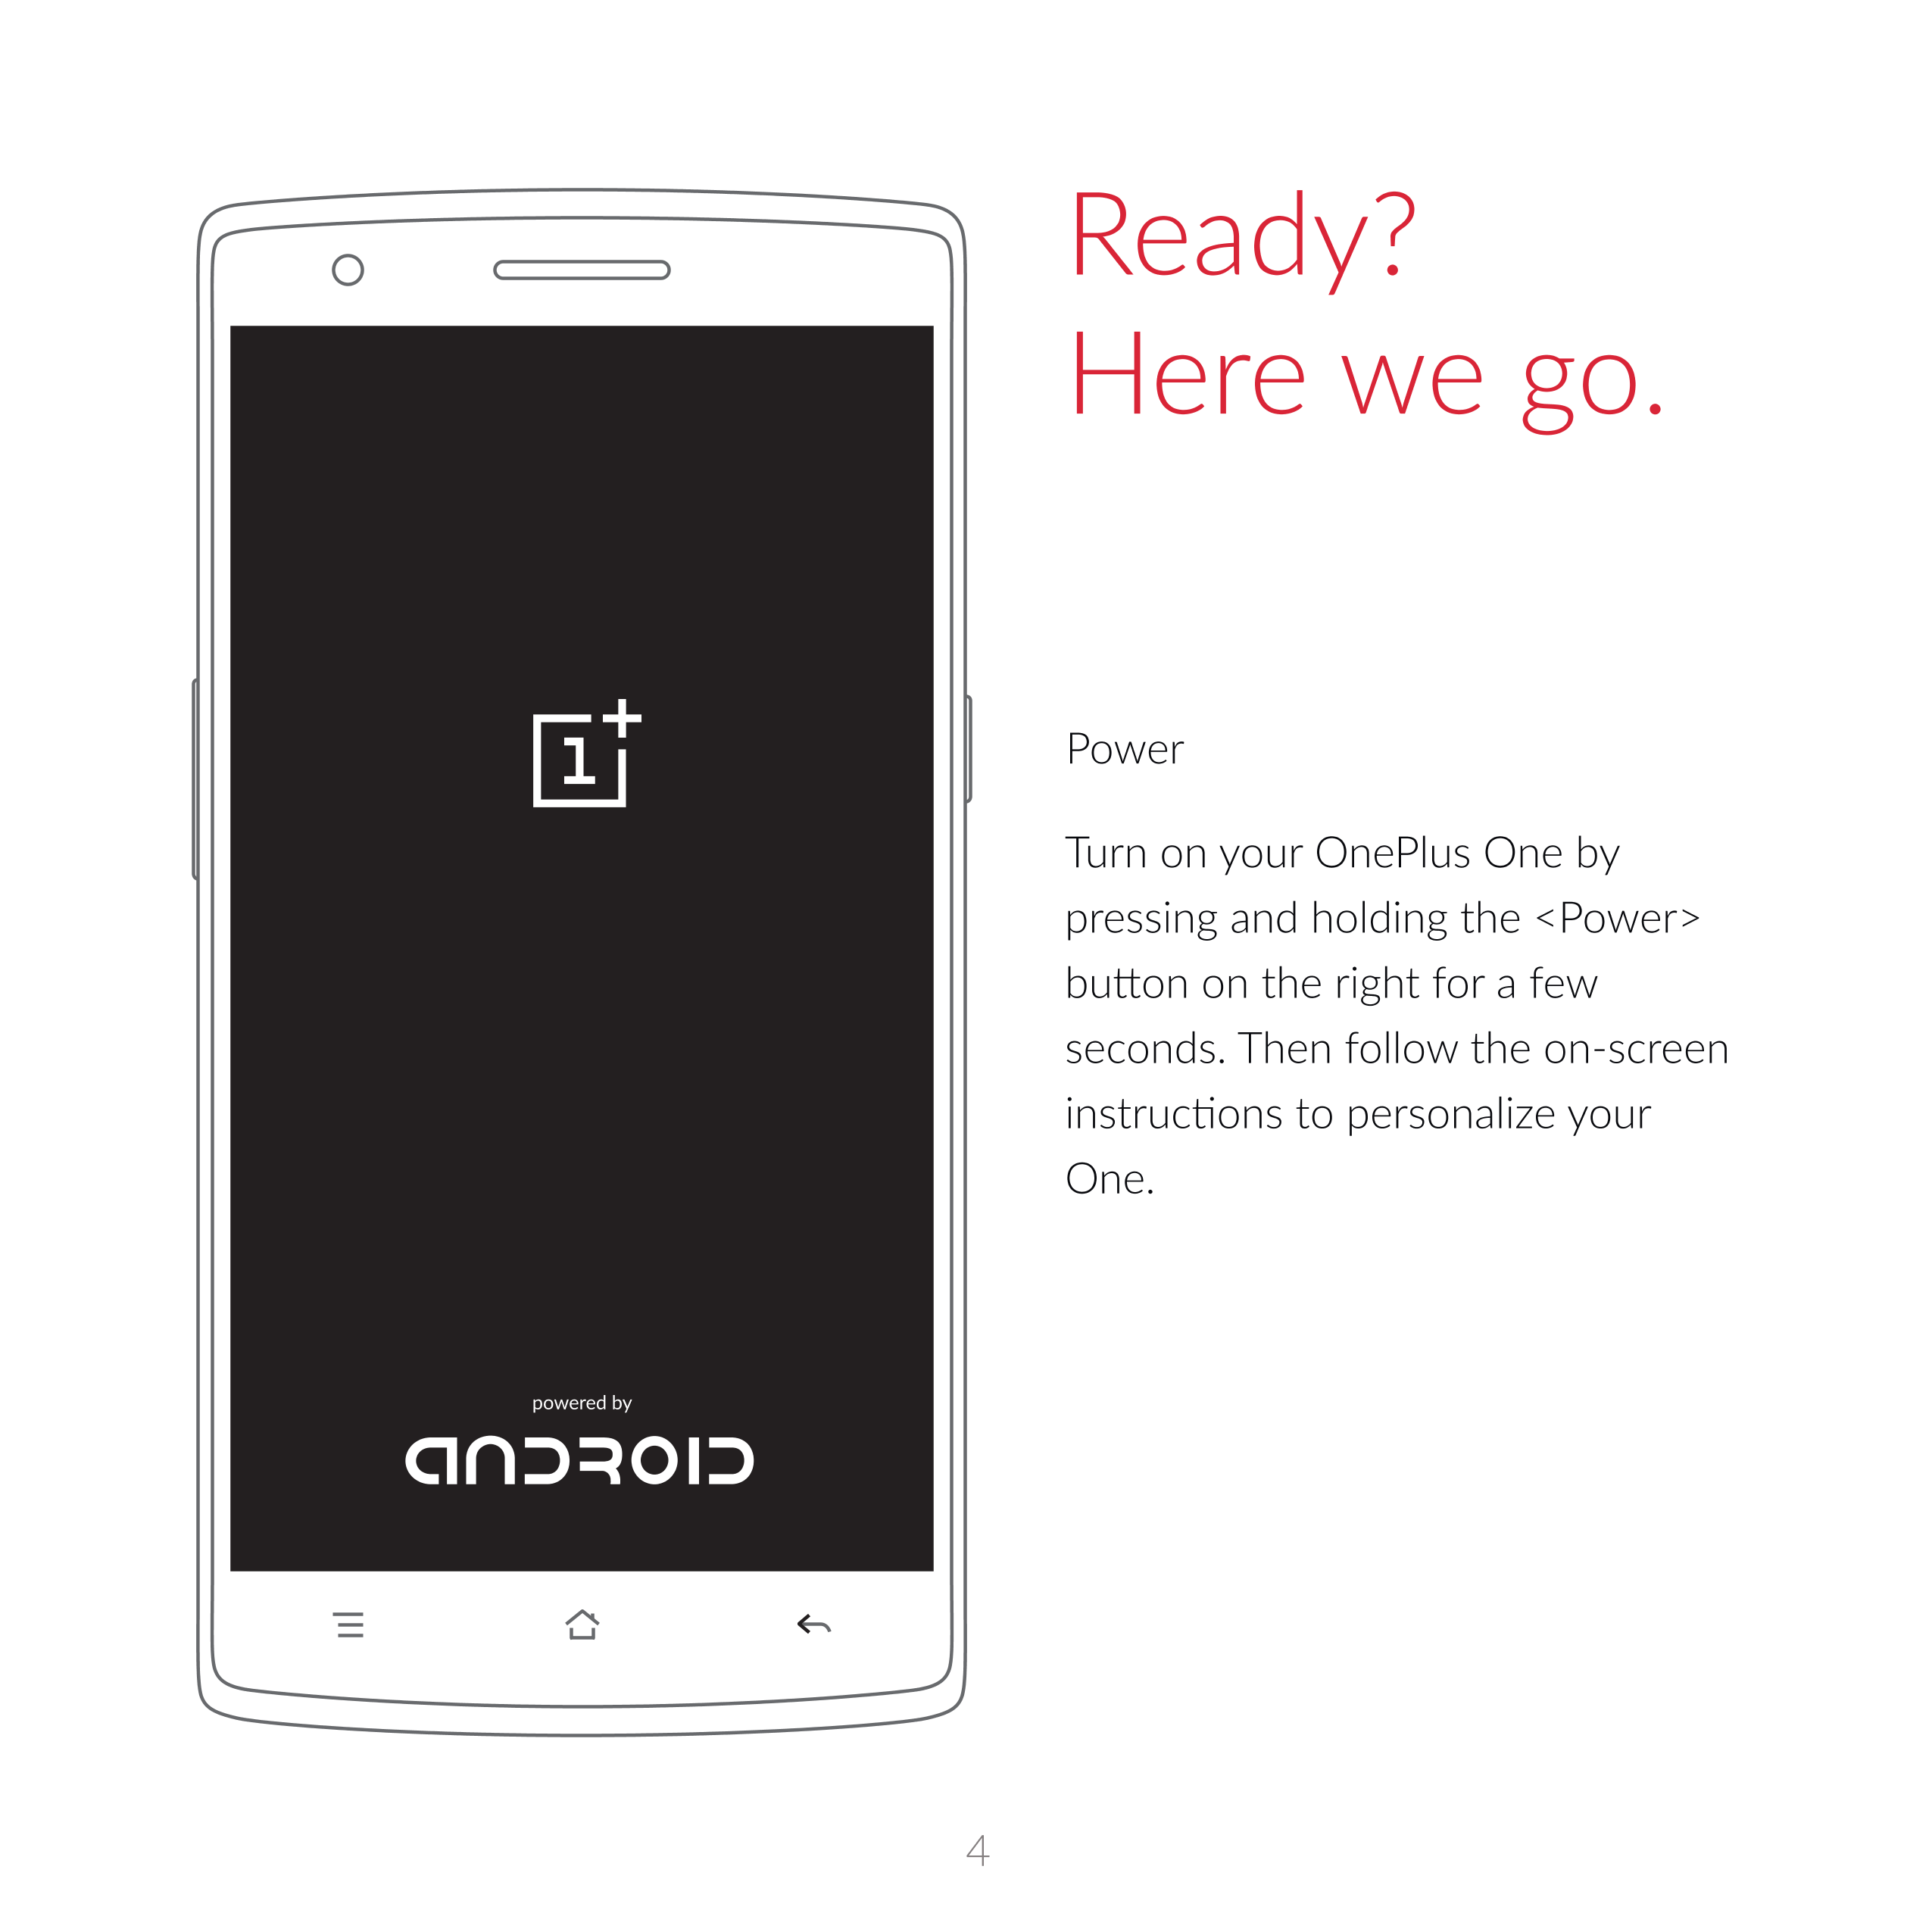 Ready?
Here  we  go. 
Power
Turn on  your  OnePlus  One  by 
pressing and holding the <Power> 
seconds.  Then  follow the on-scr